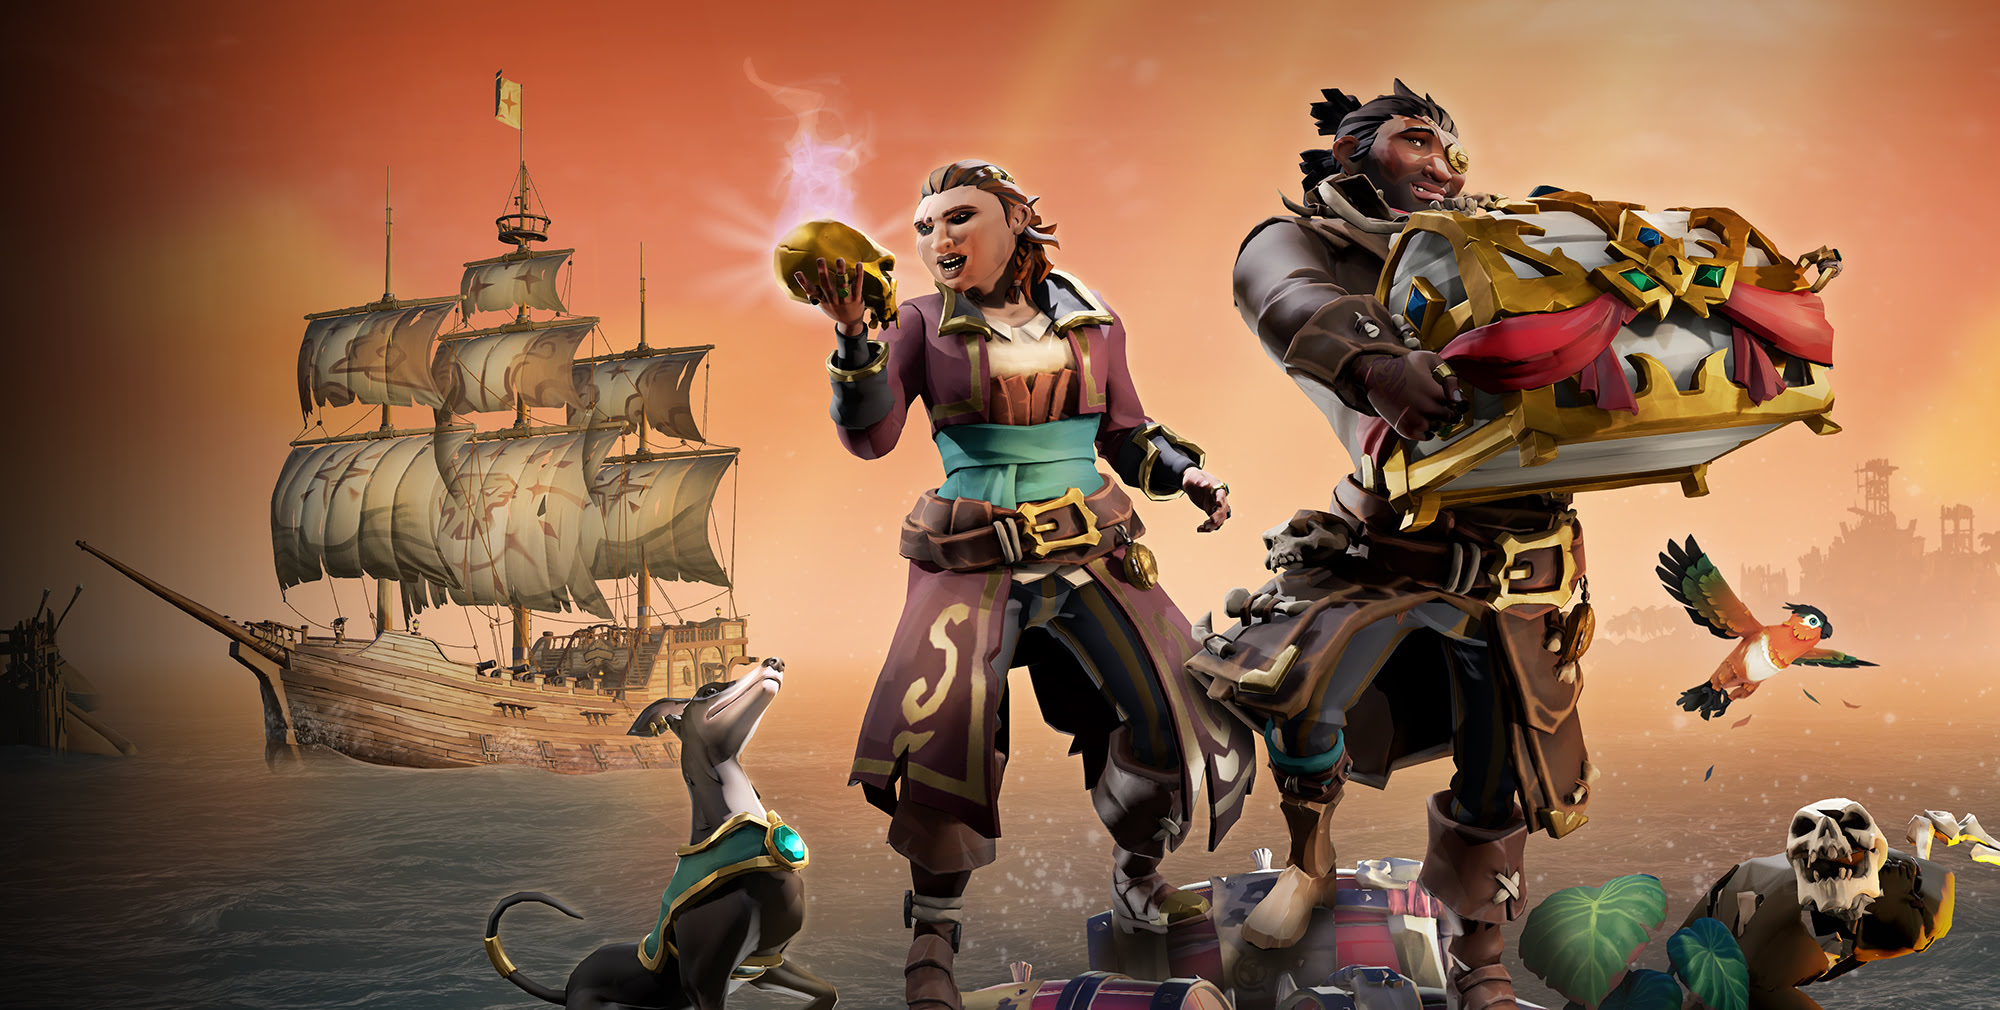 A pair of Sea of Thieves pirate smugly regard the treasure they’ve accumulated across their journey. Their pets are in the frame, including a parrot and a pooch. A bone shaded ship is in the background awaiting their return.